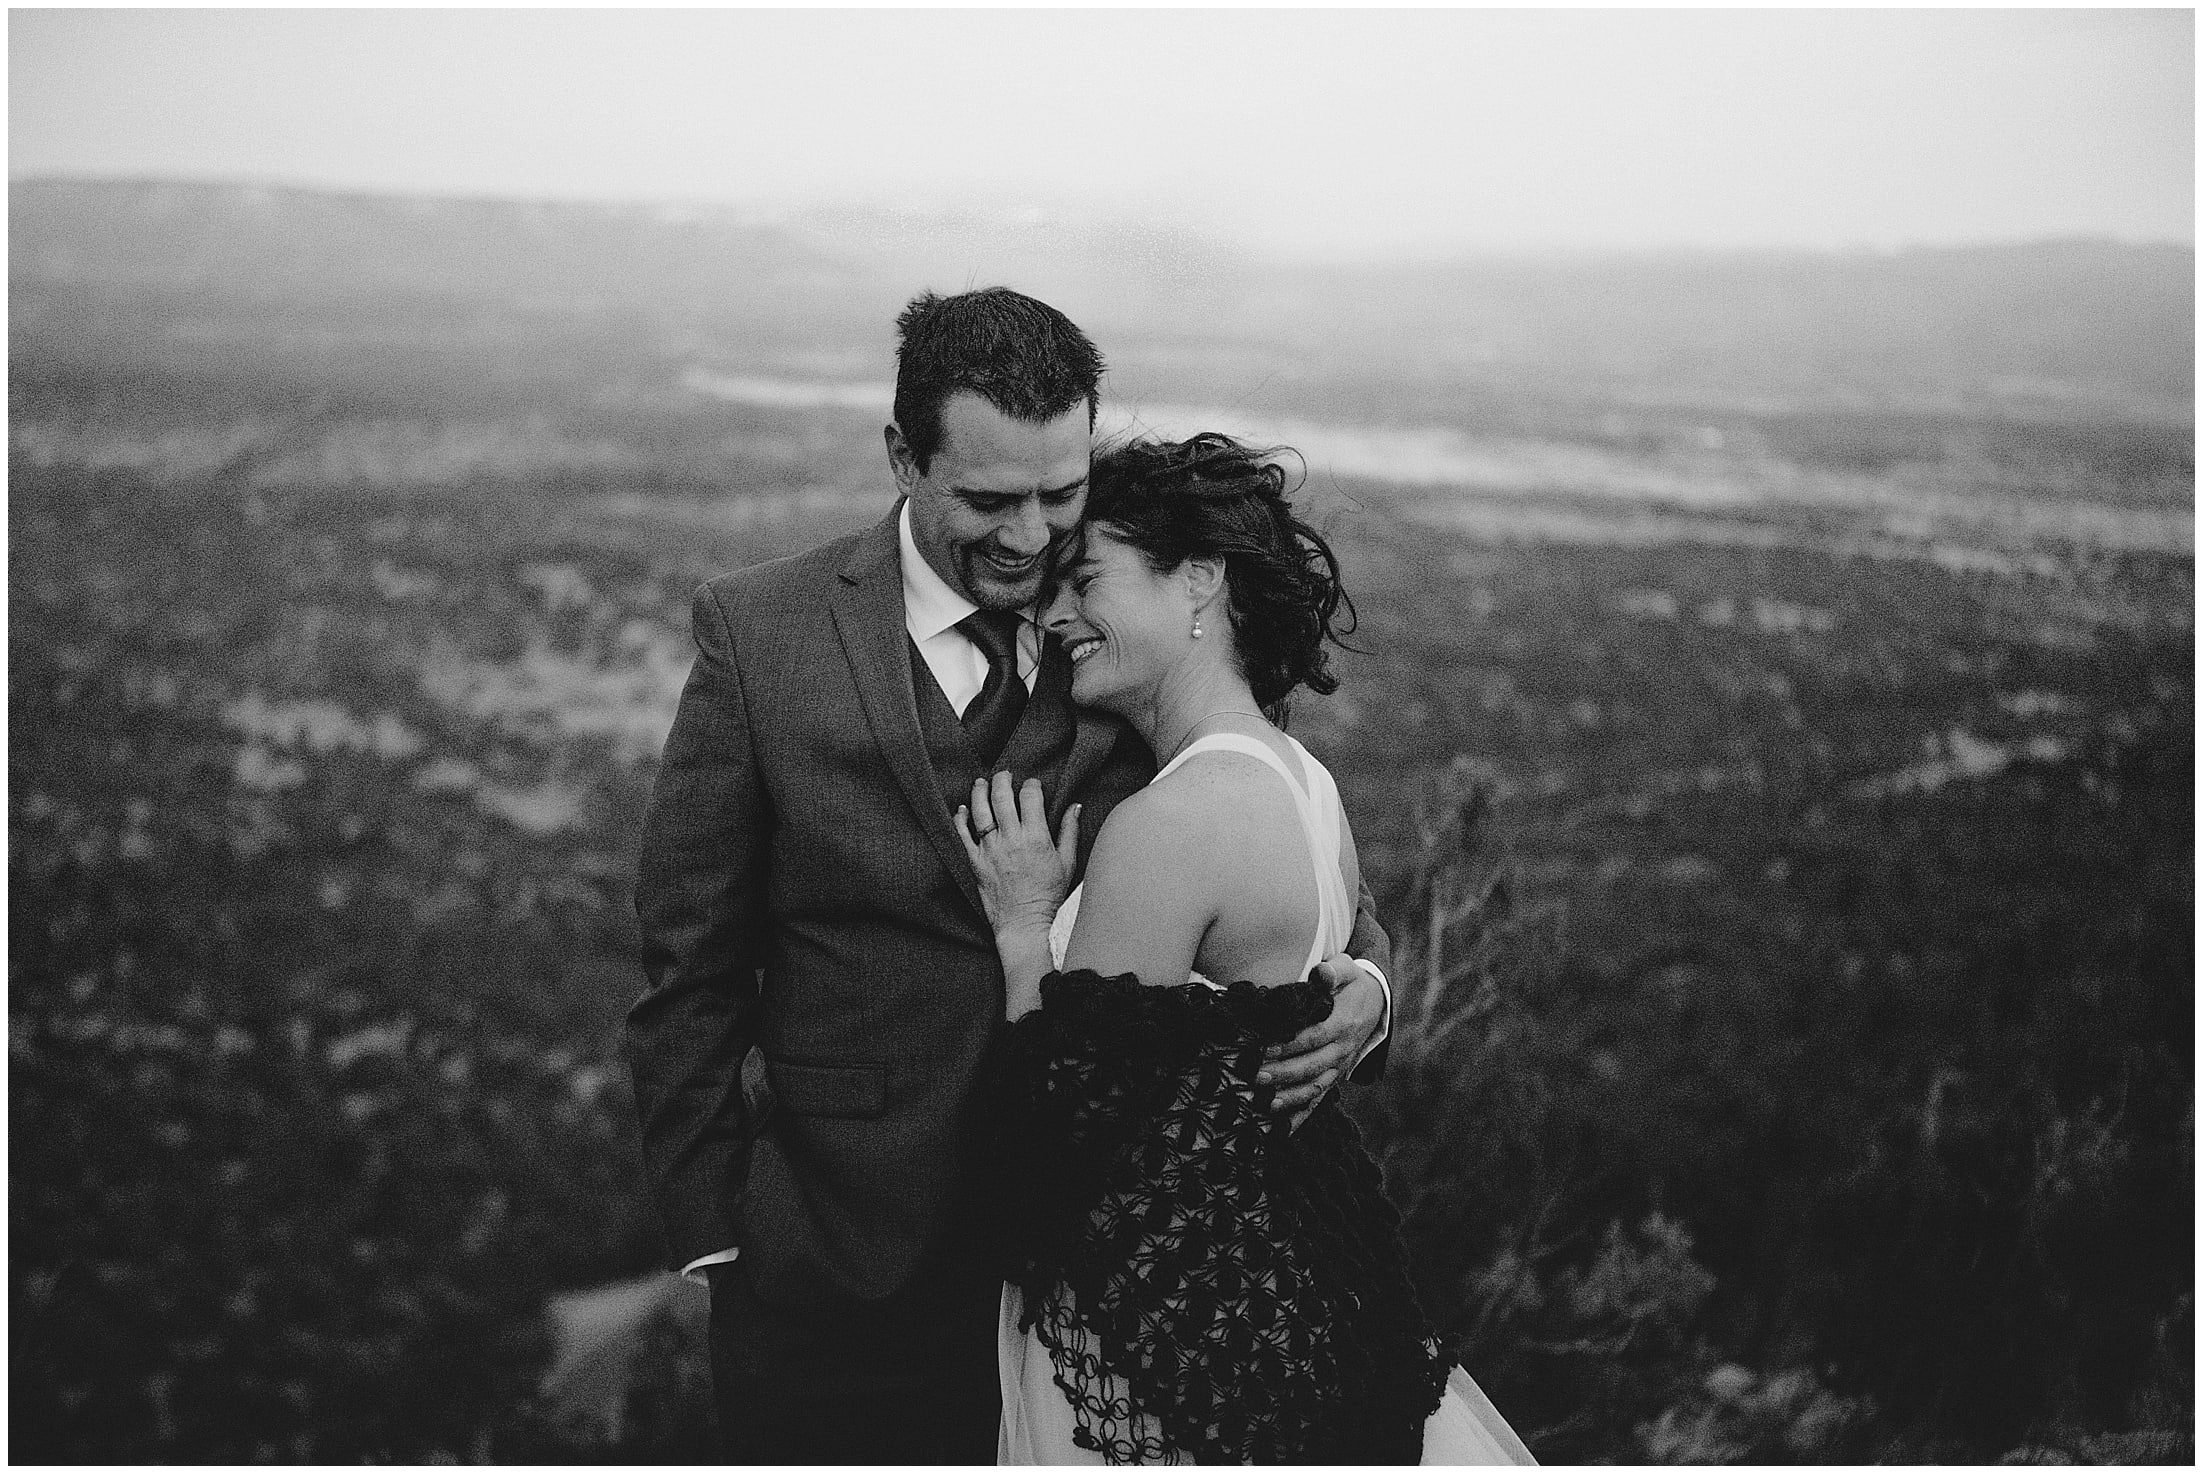 First Look, Photographer, photographer near me, wedding photographer, Blame Her Ranch, New Mexico Photographer, Old Gringo Boots, David's Bridal, Stagehead Designs, Brit Nicole Photography, styled wedding, intimate, Day After, Palo Duro Canyon, Amarillo Photographer, Texas Wedding Photographer